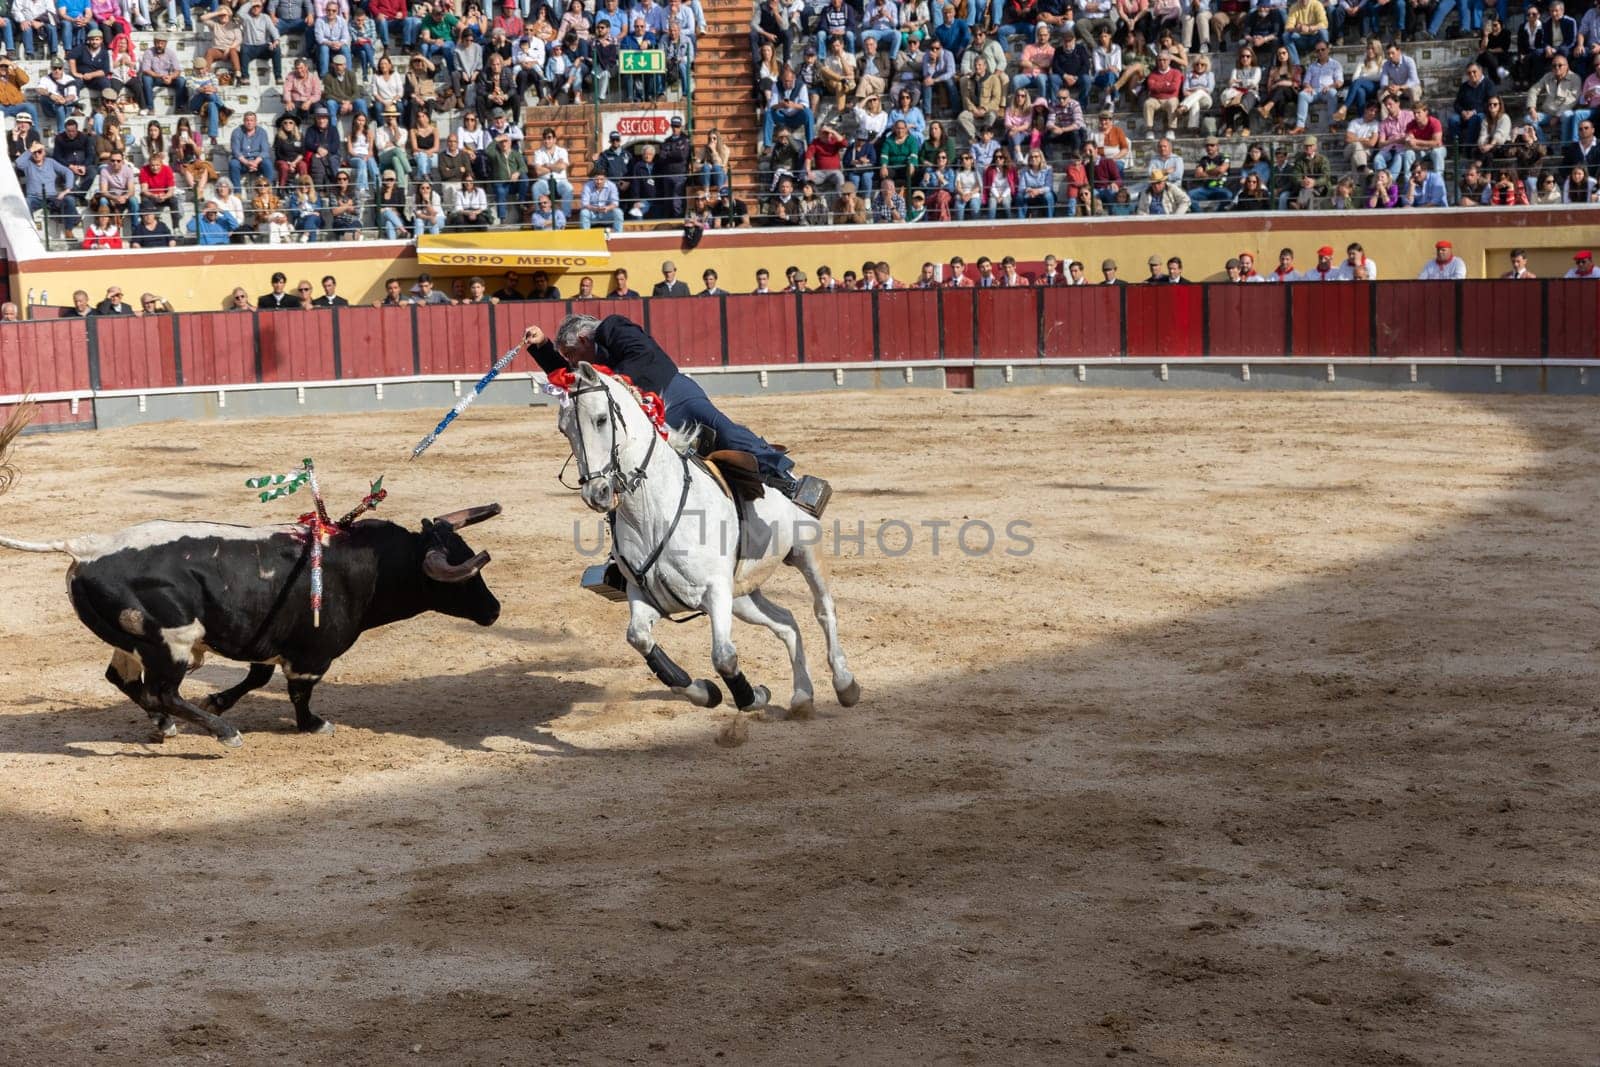 March 26, 2023 Lisbon, Portugal: Tourada - bullfighter on horseback stabbing a bull with a spearin an arena by Studia72